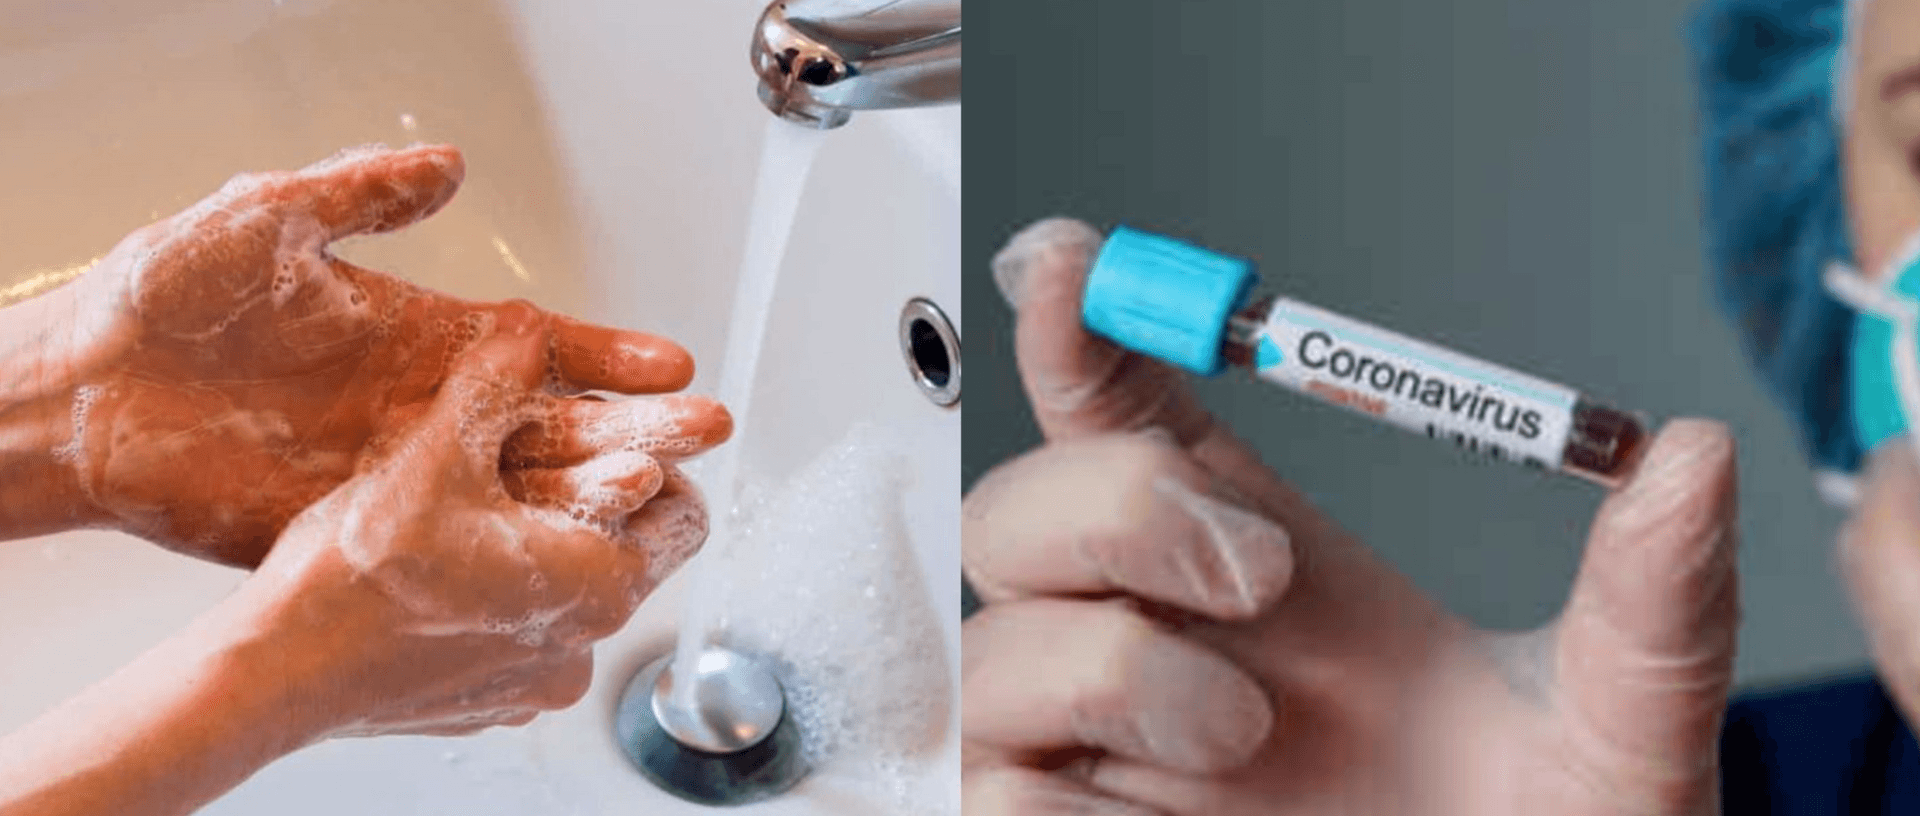 Covid-19: How To Make Hand Sanitizer, Face Mask &amp; Disinfectant At Home During Lockdown